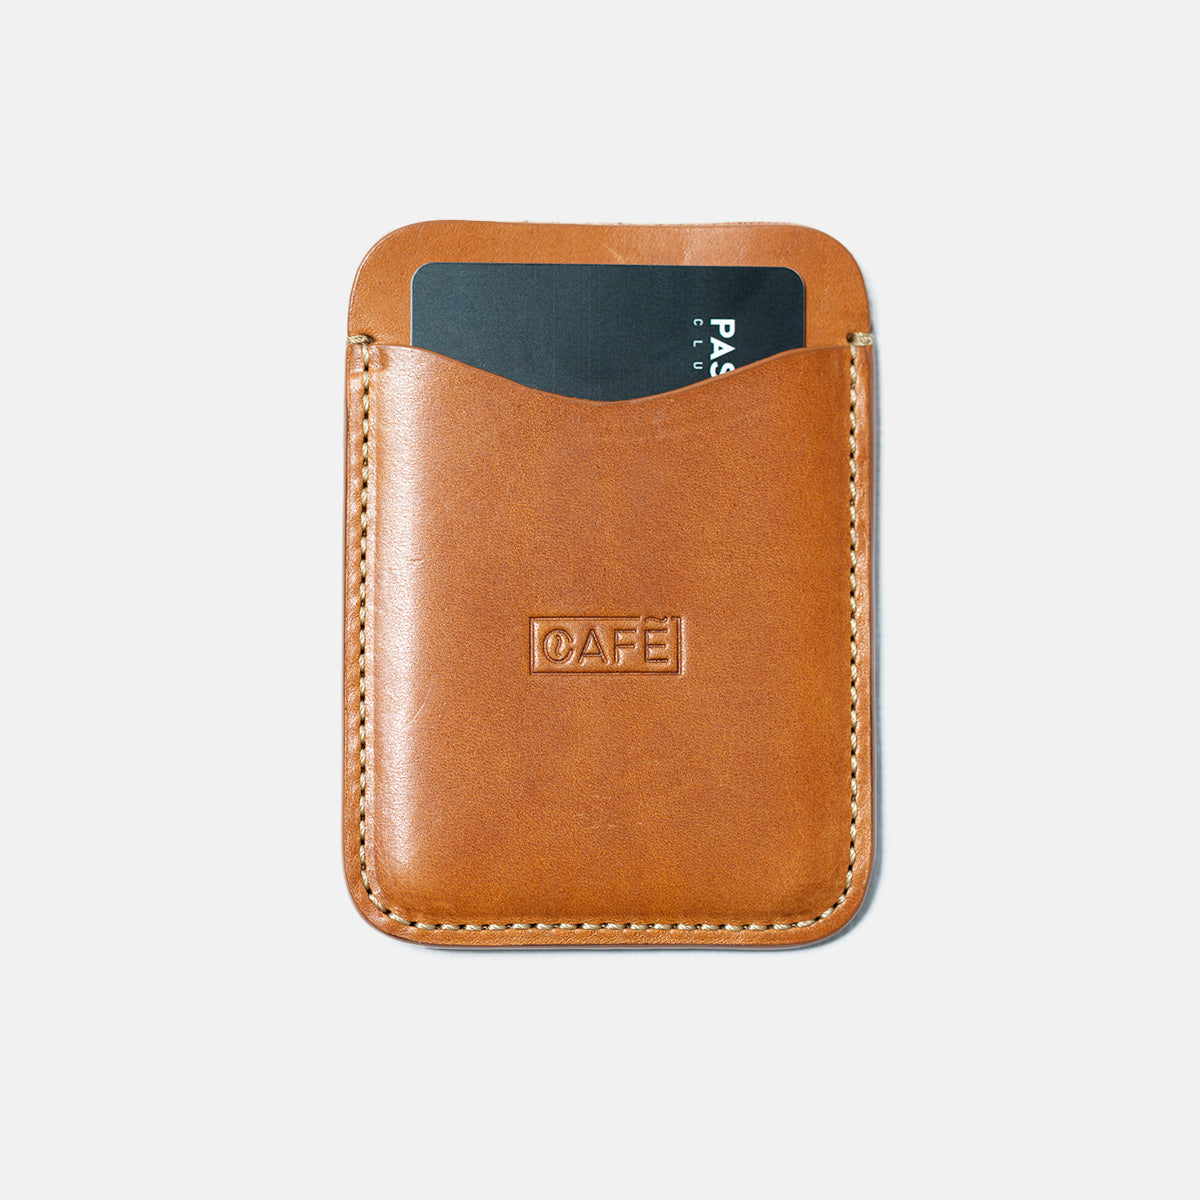 leather card holder roasted front card